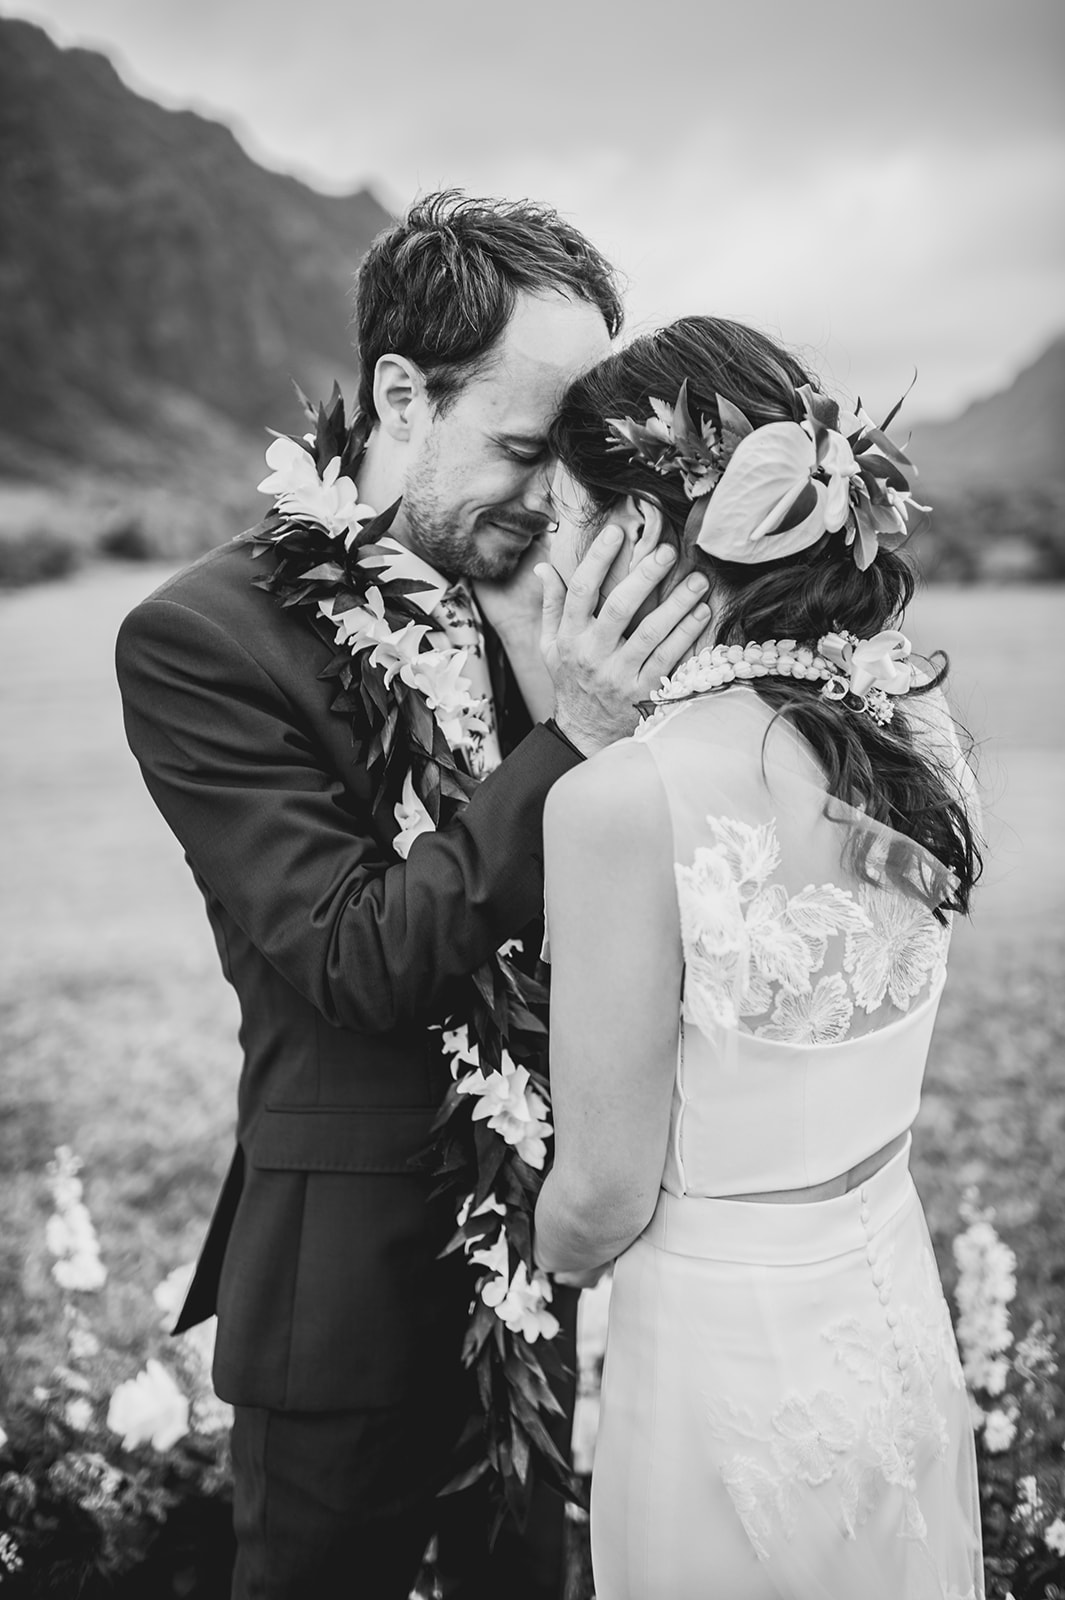 The couple shares a romantic moment, enveloped in the natural beauty of their surroundings of Kualoa Ranch L Hewitt Photography